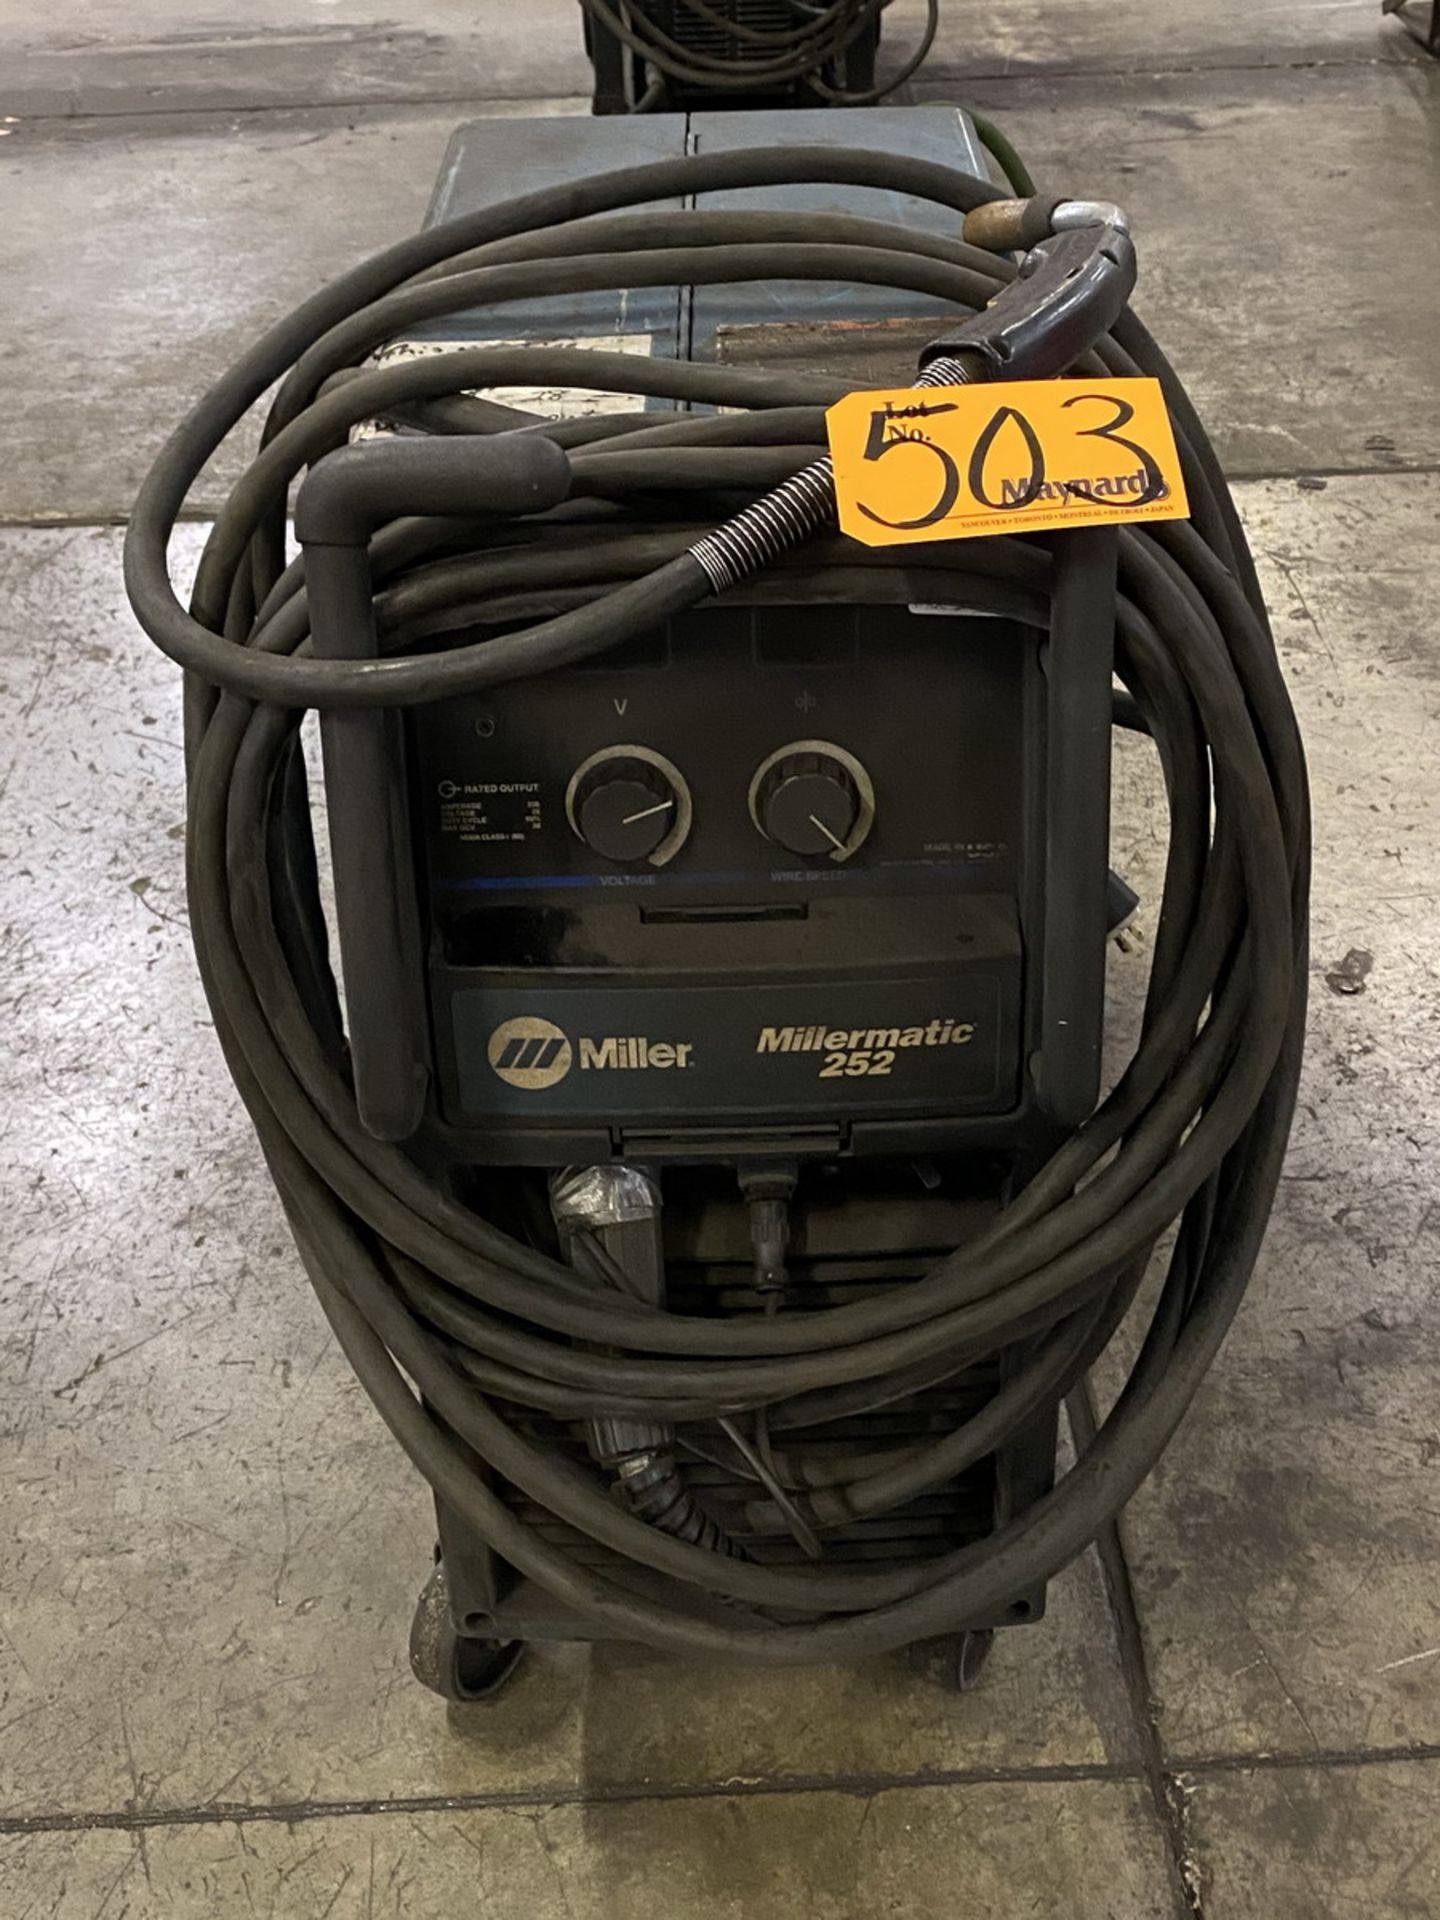 Miller Millermatic 252 Wire Welder Output: 28V, 200A, 60% Duty Cycle